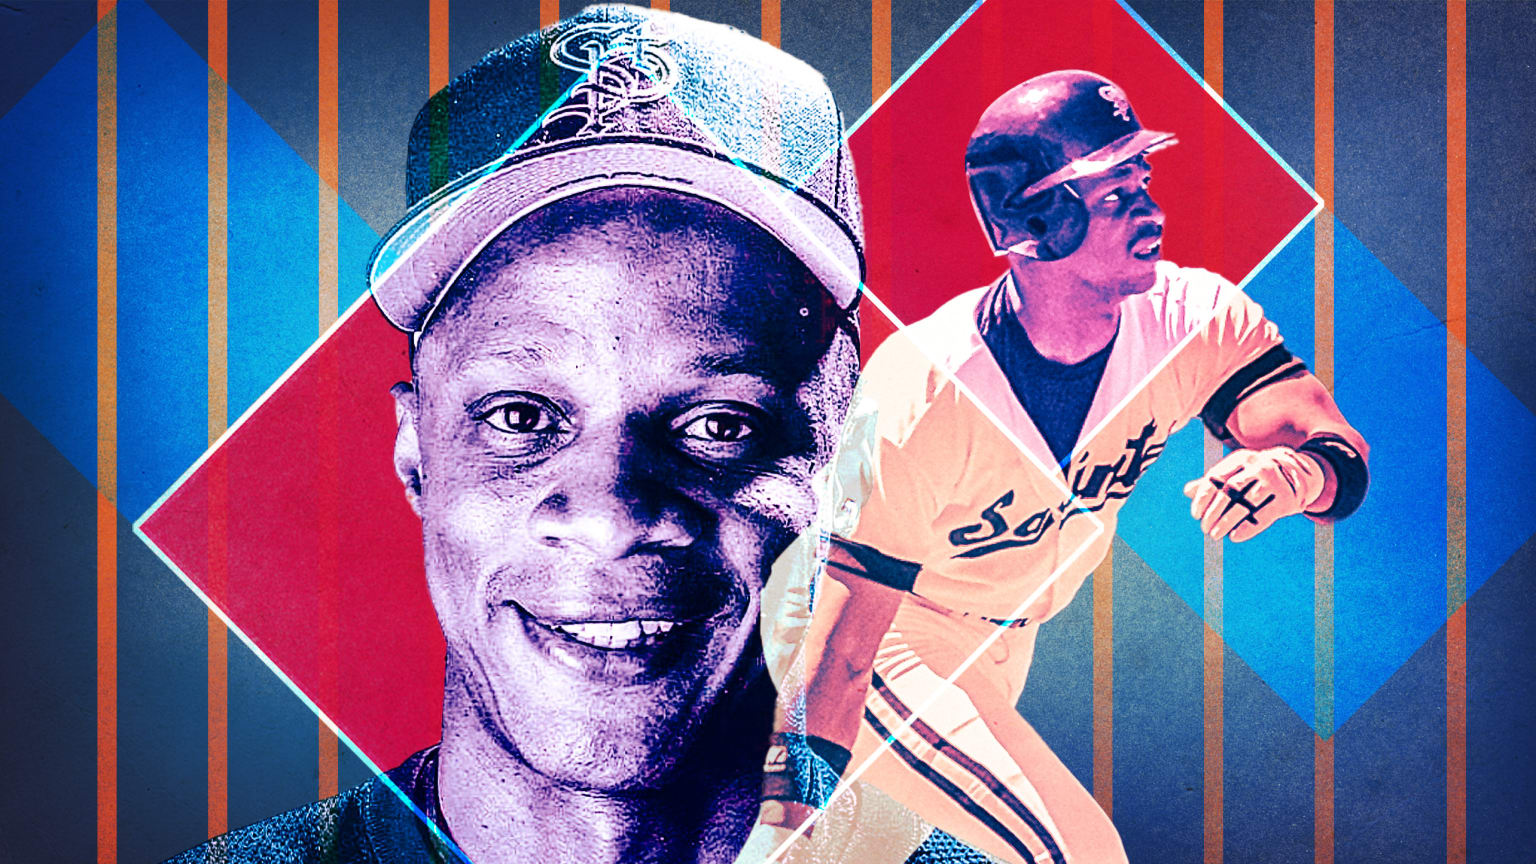 A photo illustration of Darryl Strawberry with the St. Paul Saints